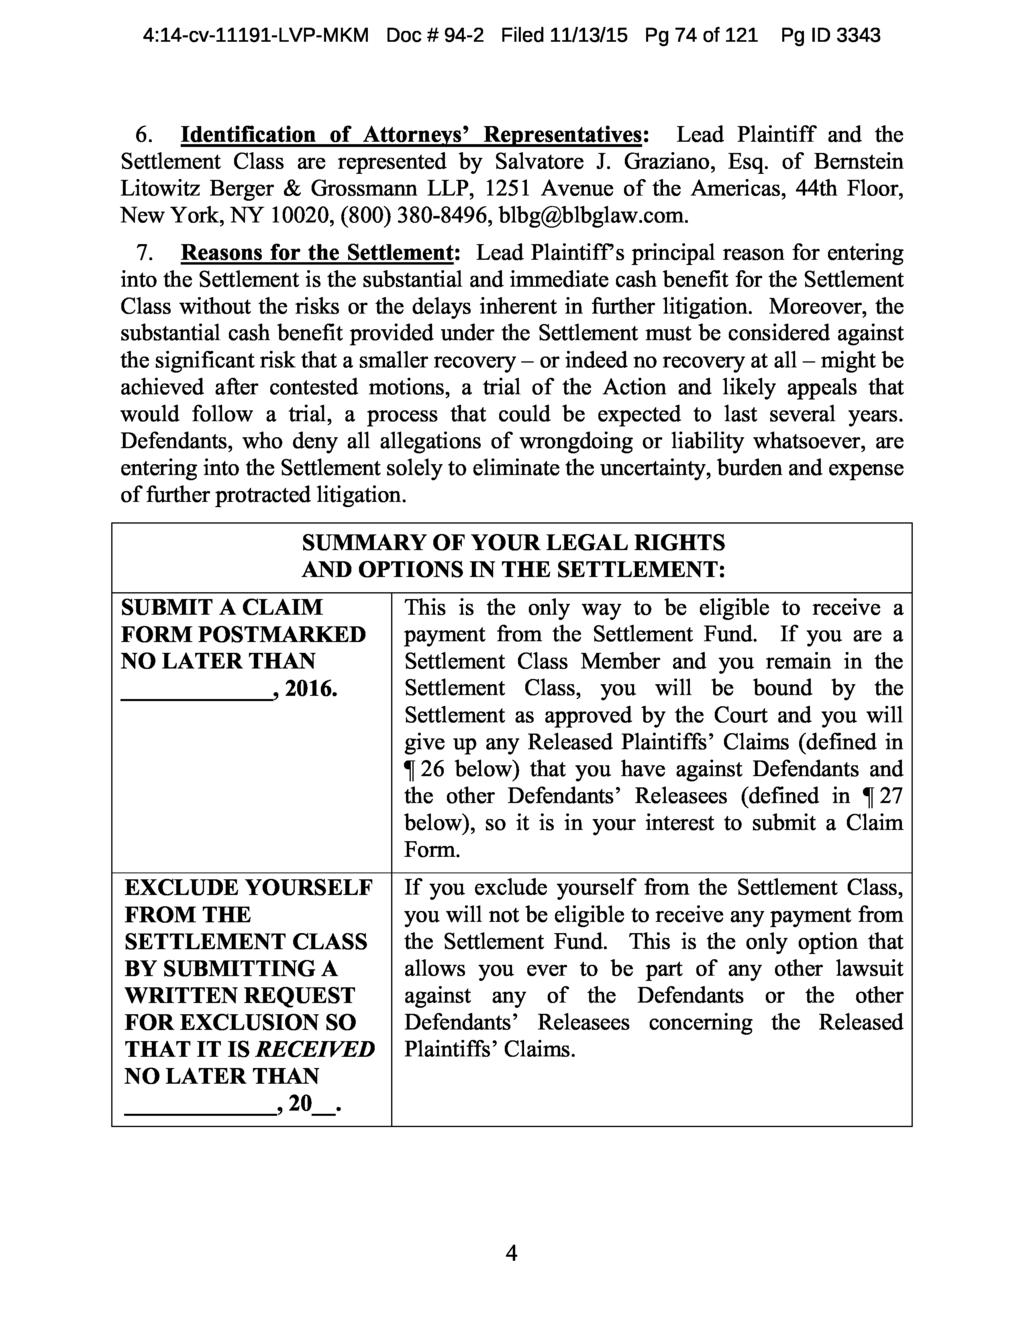 4:14-cv-11191-LVP-MKM Doc # 94-2 Filed 11/13/15 Pg 74 of 121 Pg ID 3343 6. Identification of Attorneys' Representatives: Lead Plaintiff and the Settlement Class are represented by Salvatore J.